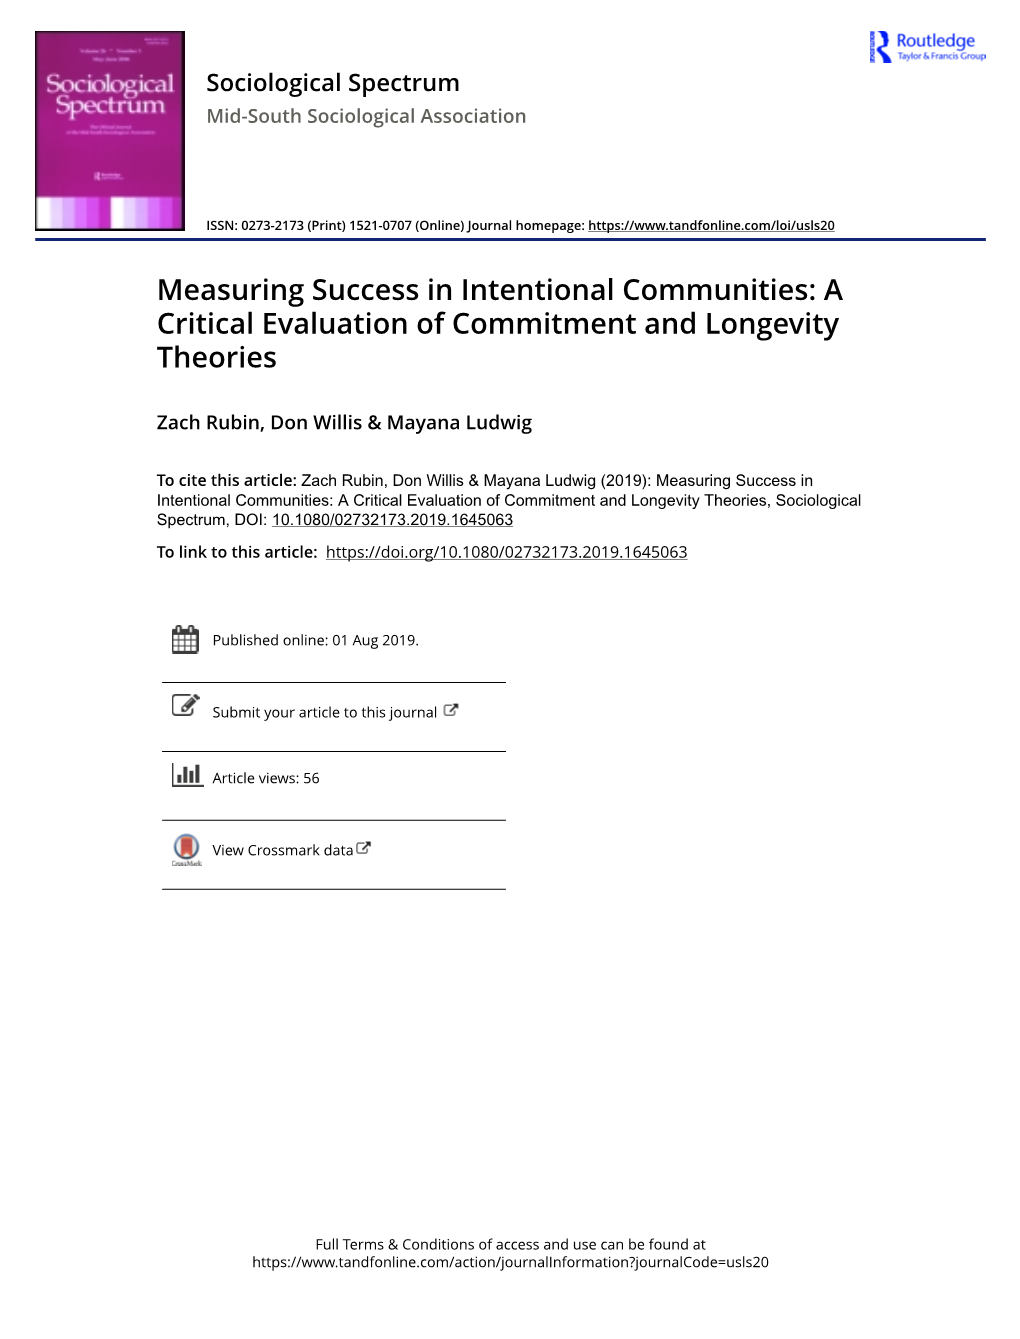 Measuring Success in Intentional Communities: a Critical Evaluation of Commitment and Longevity Theories